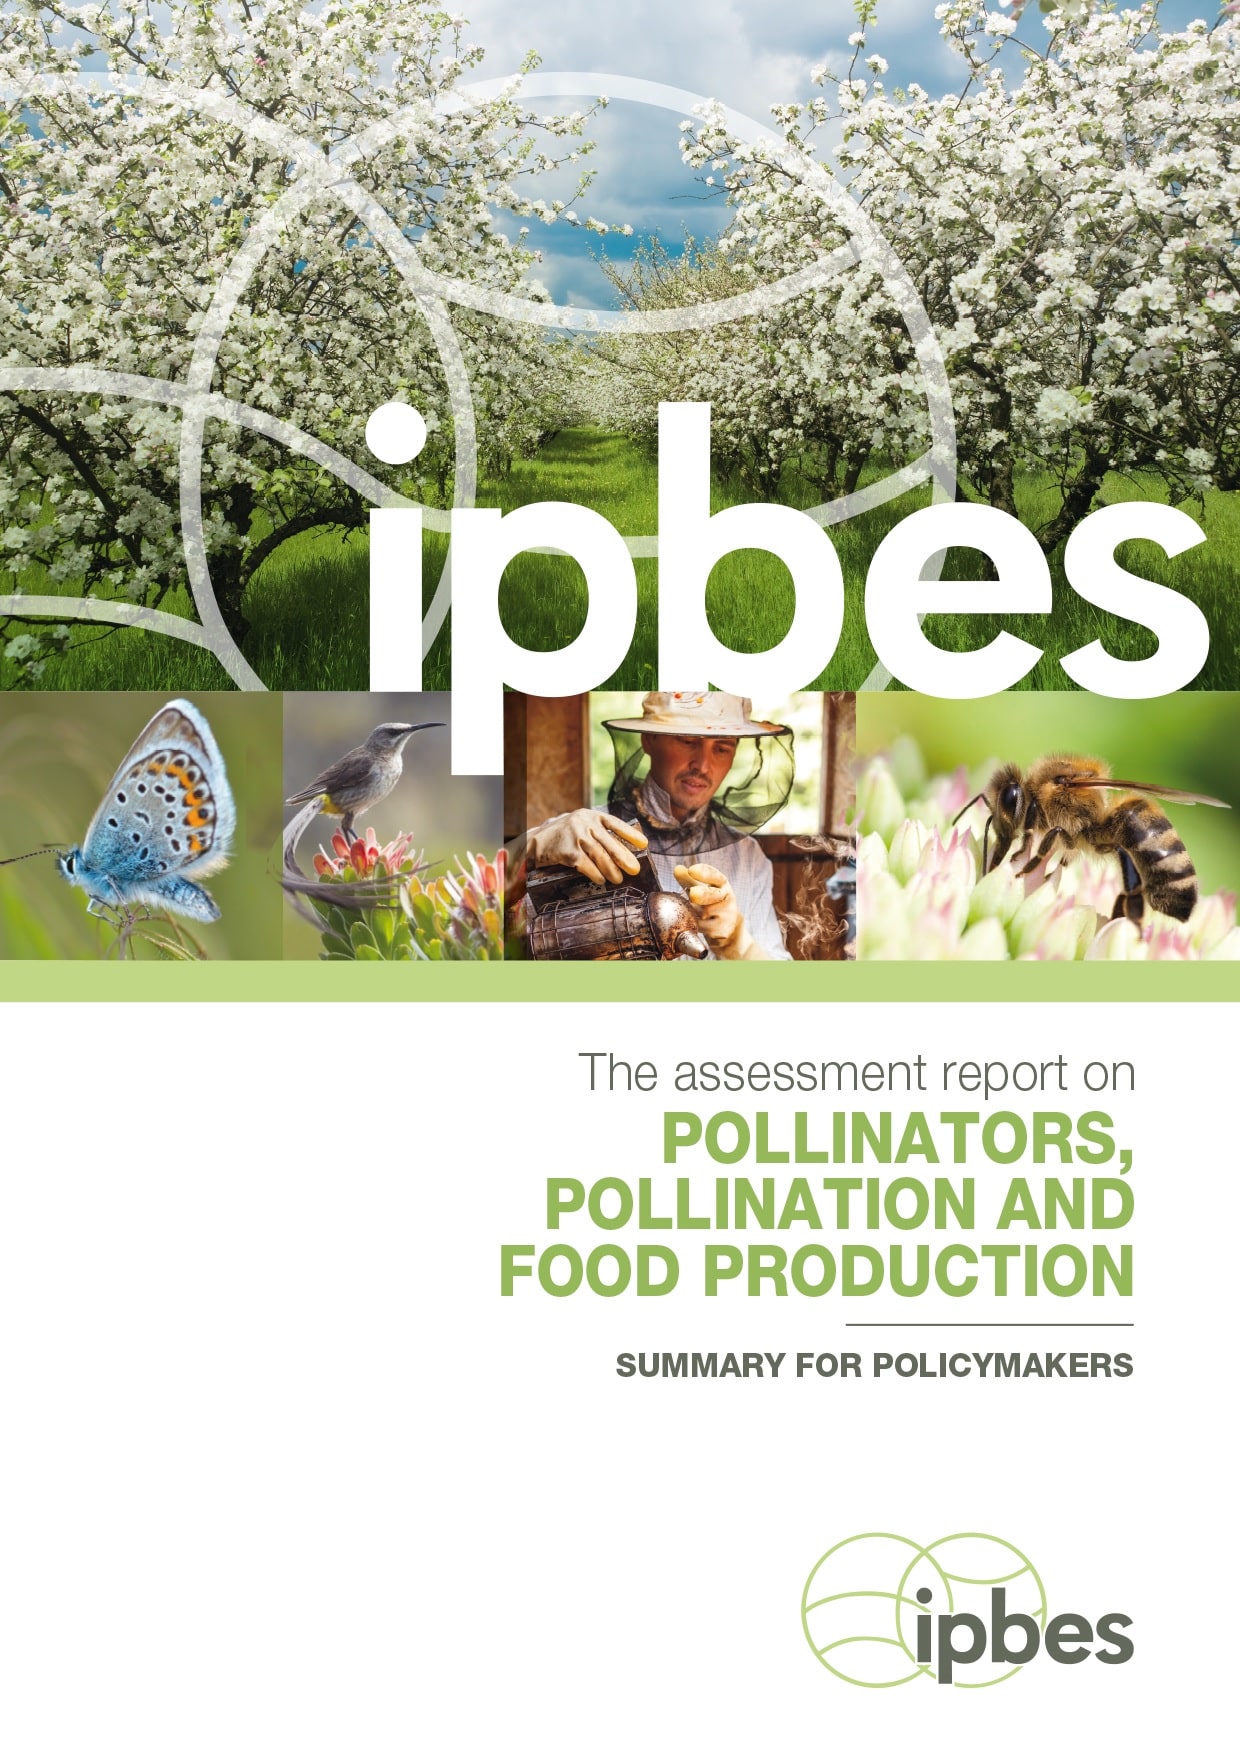 https://commons.wikimedia.org/wiki/File:Cover_page_Assessment_Report_on_Pollinators,_Pollination_and_Food_Production.jpg